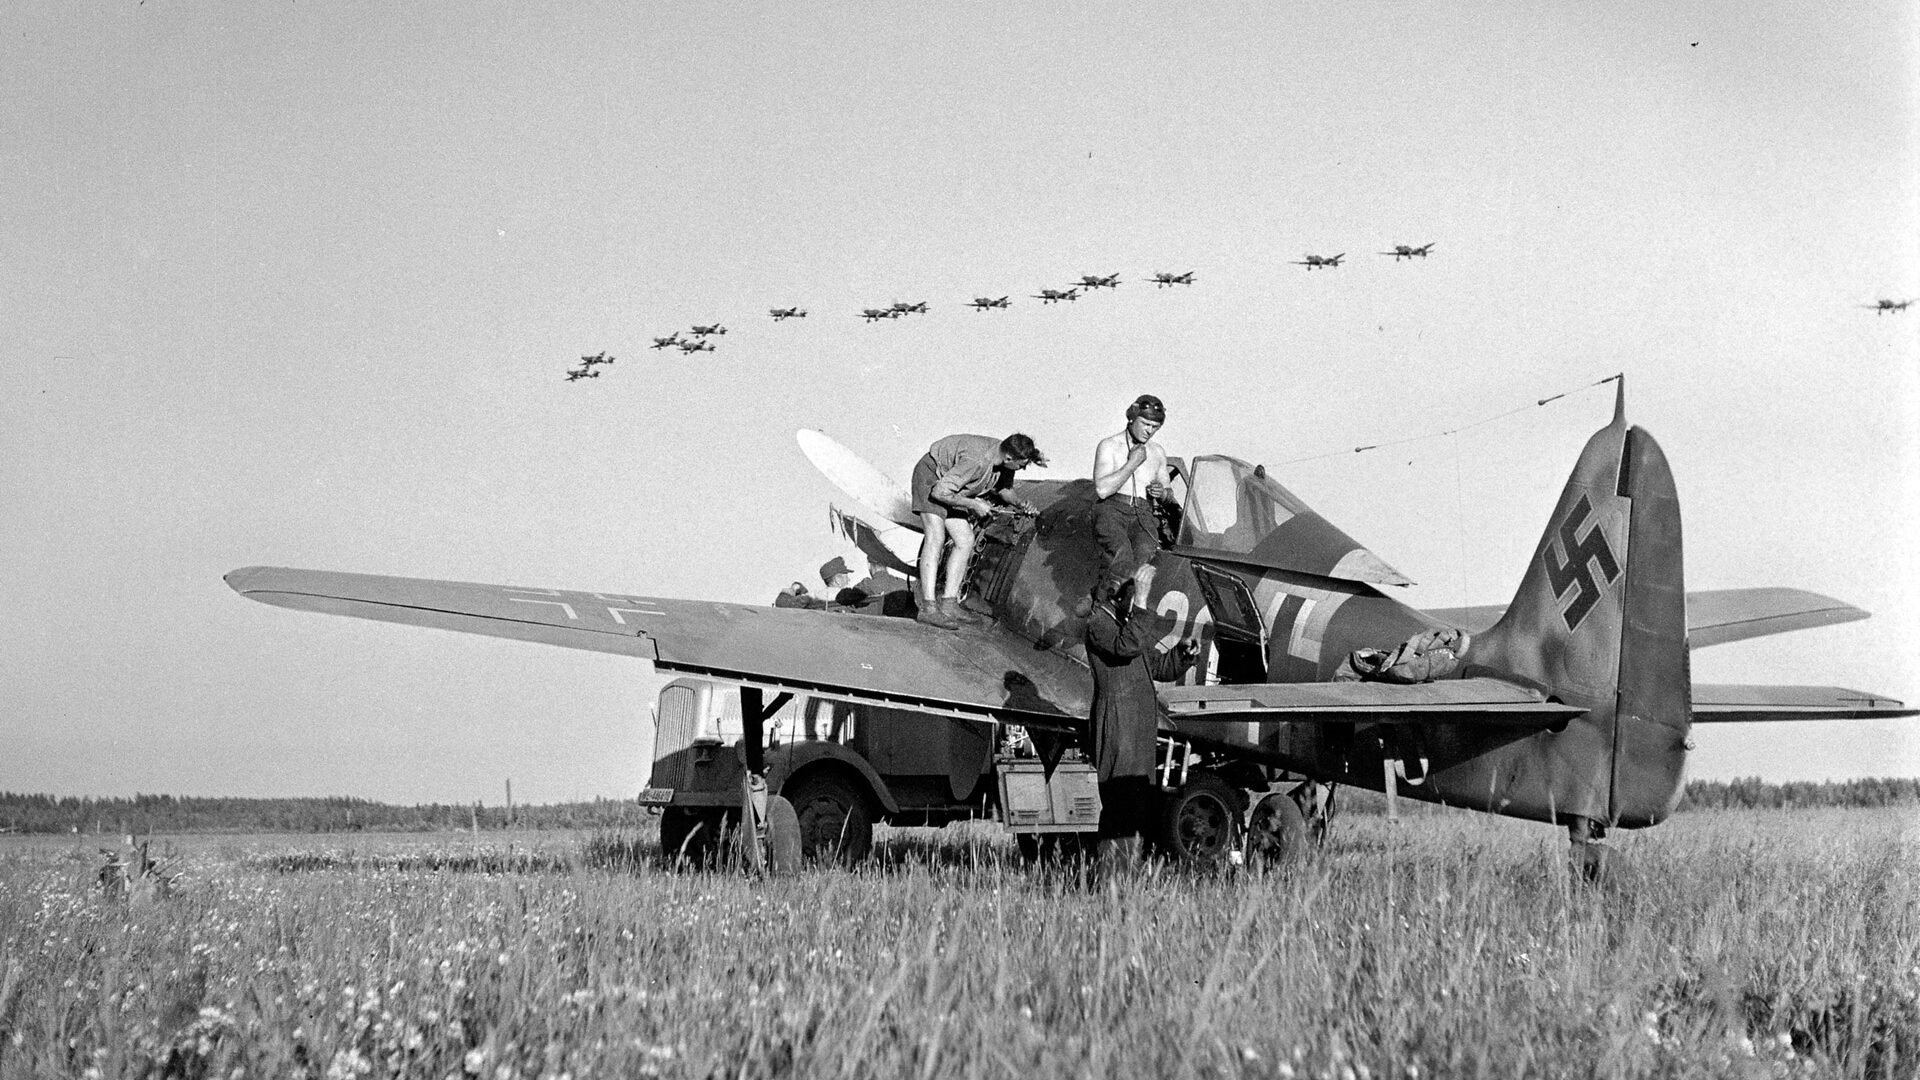 An Fw-190 of JG-52 is serviced at an airfield in Immola, Finland, while Junkers Ju-87 Stuka dive bombers fly in the distance.In the summer of 1944, Nazi Germany deployed Fw-190 fighters to Finland to assist their allies in the fighting against the Soviet Union.